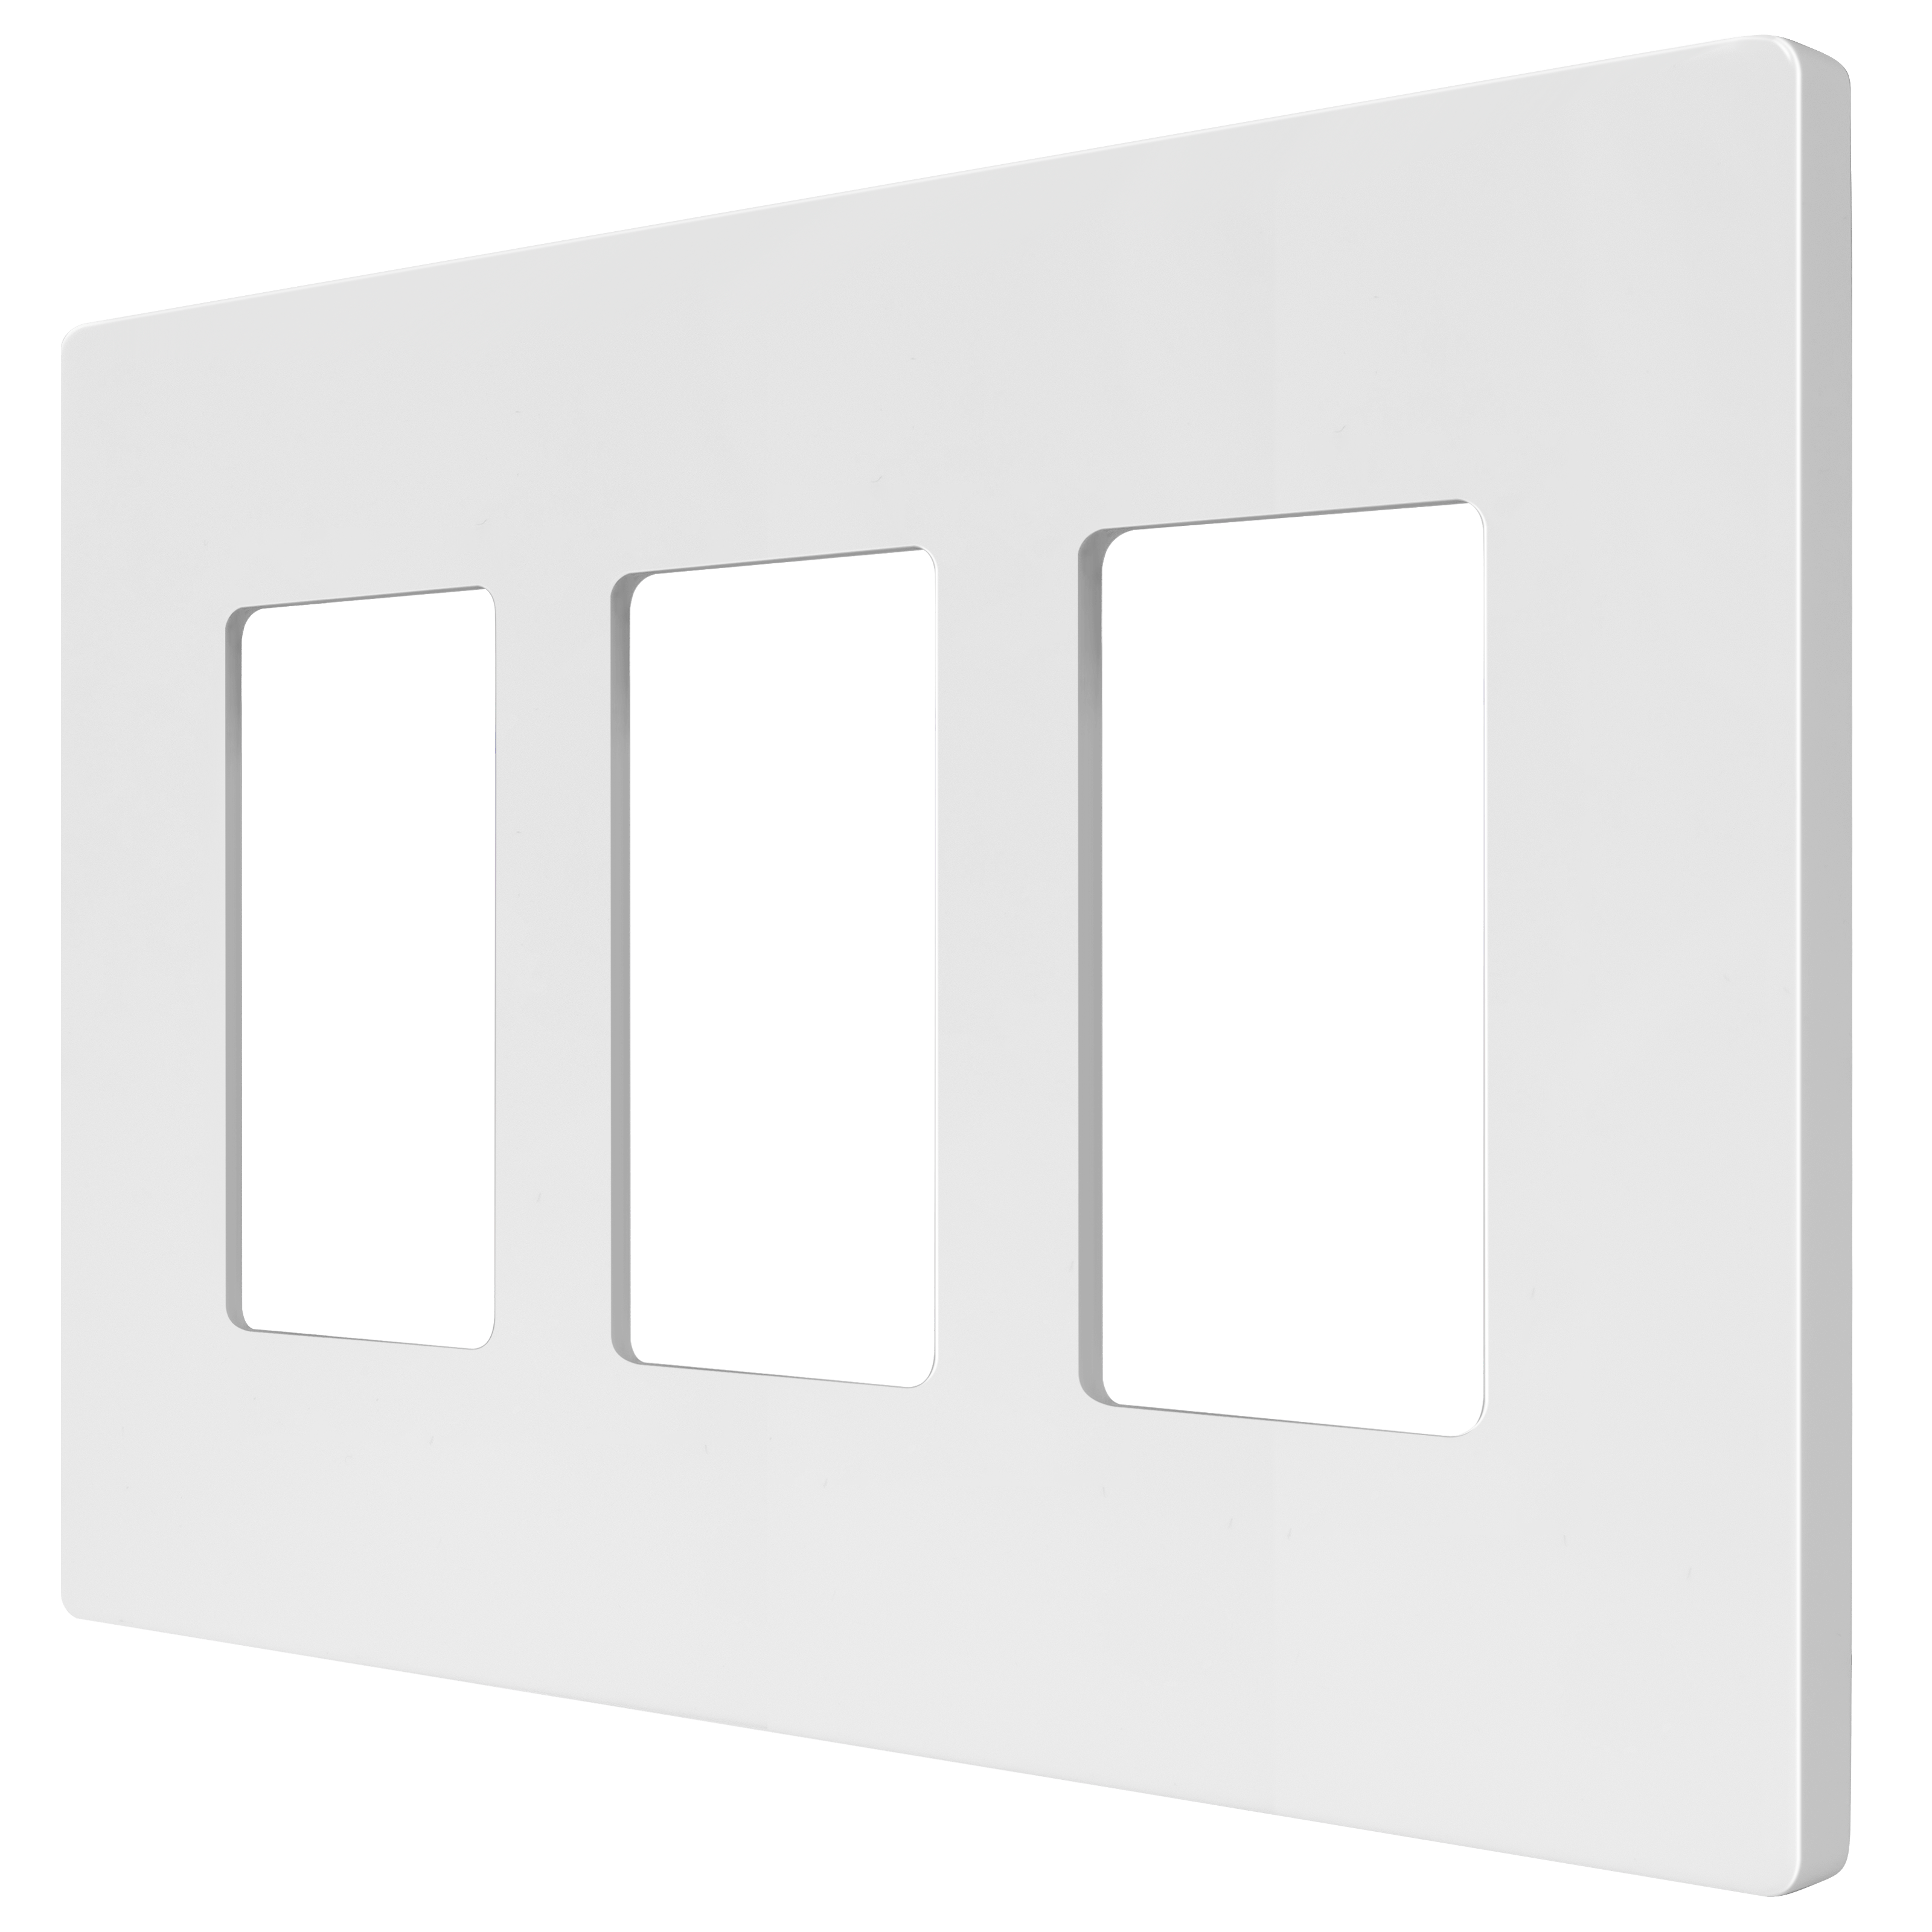 Rêve Collection Luxury Triple Decorator Switch Cover Screwless Wall Plate